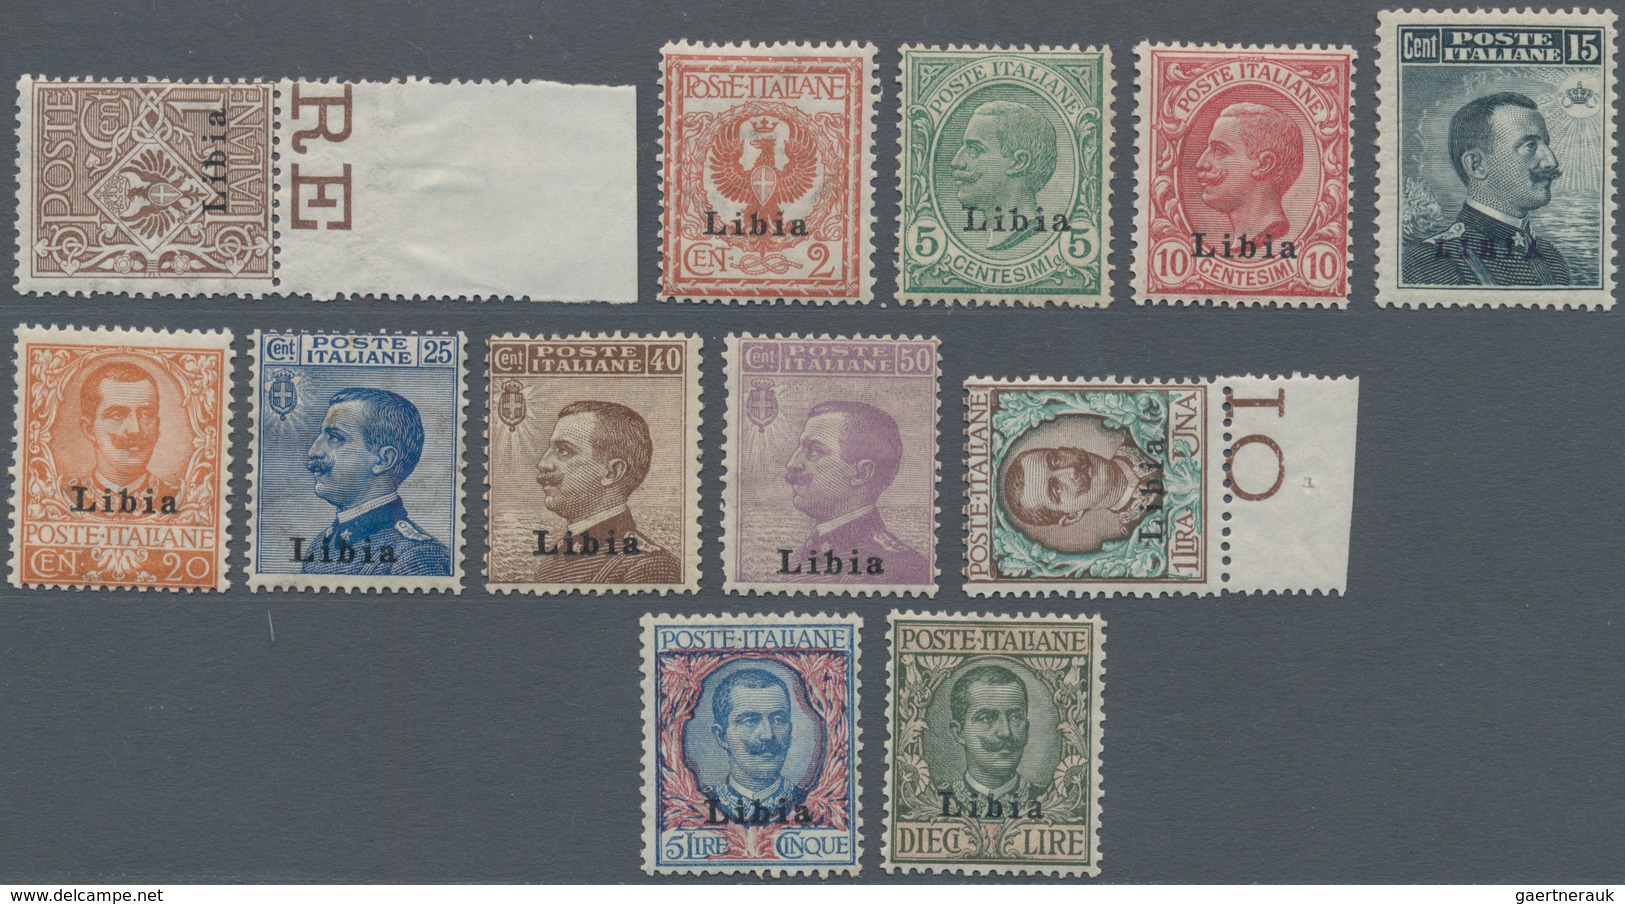 01058 Italienisch-Libyen: 1912/1915: Stamps Of Italy "Michetti" And "Floreale" With Overprint LIBIA, Compl - Libyen